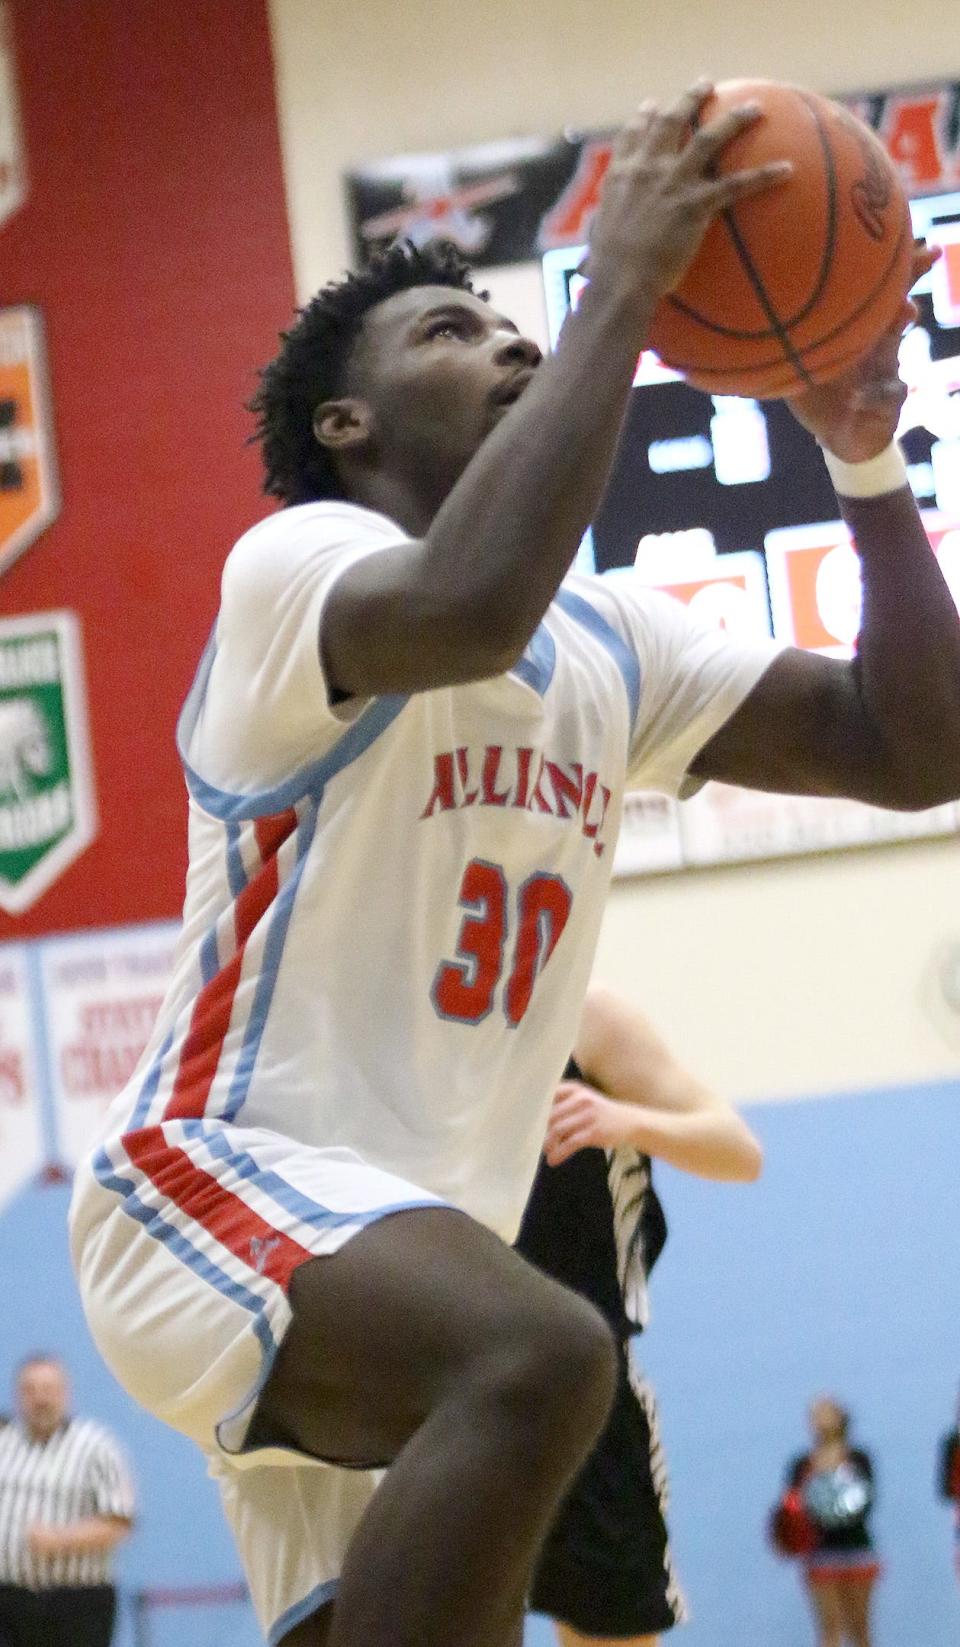 Alliance's Nino Hill puts up a shot against Carrollton during conference action at Alliance High School on Tuesday.